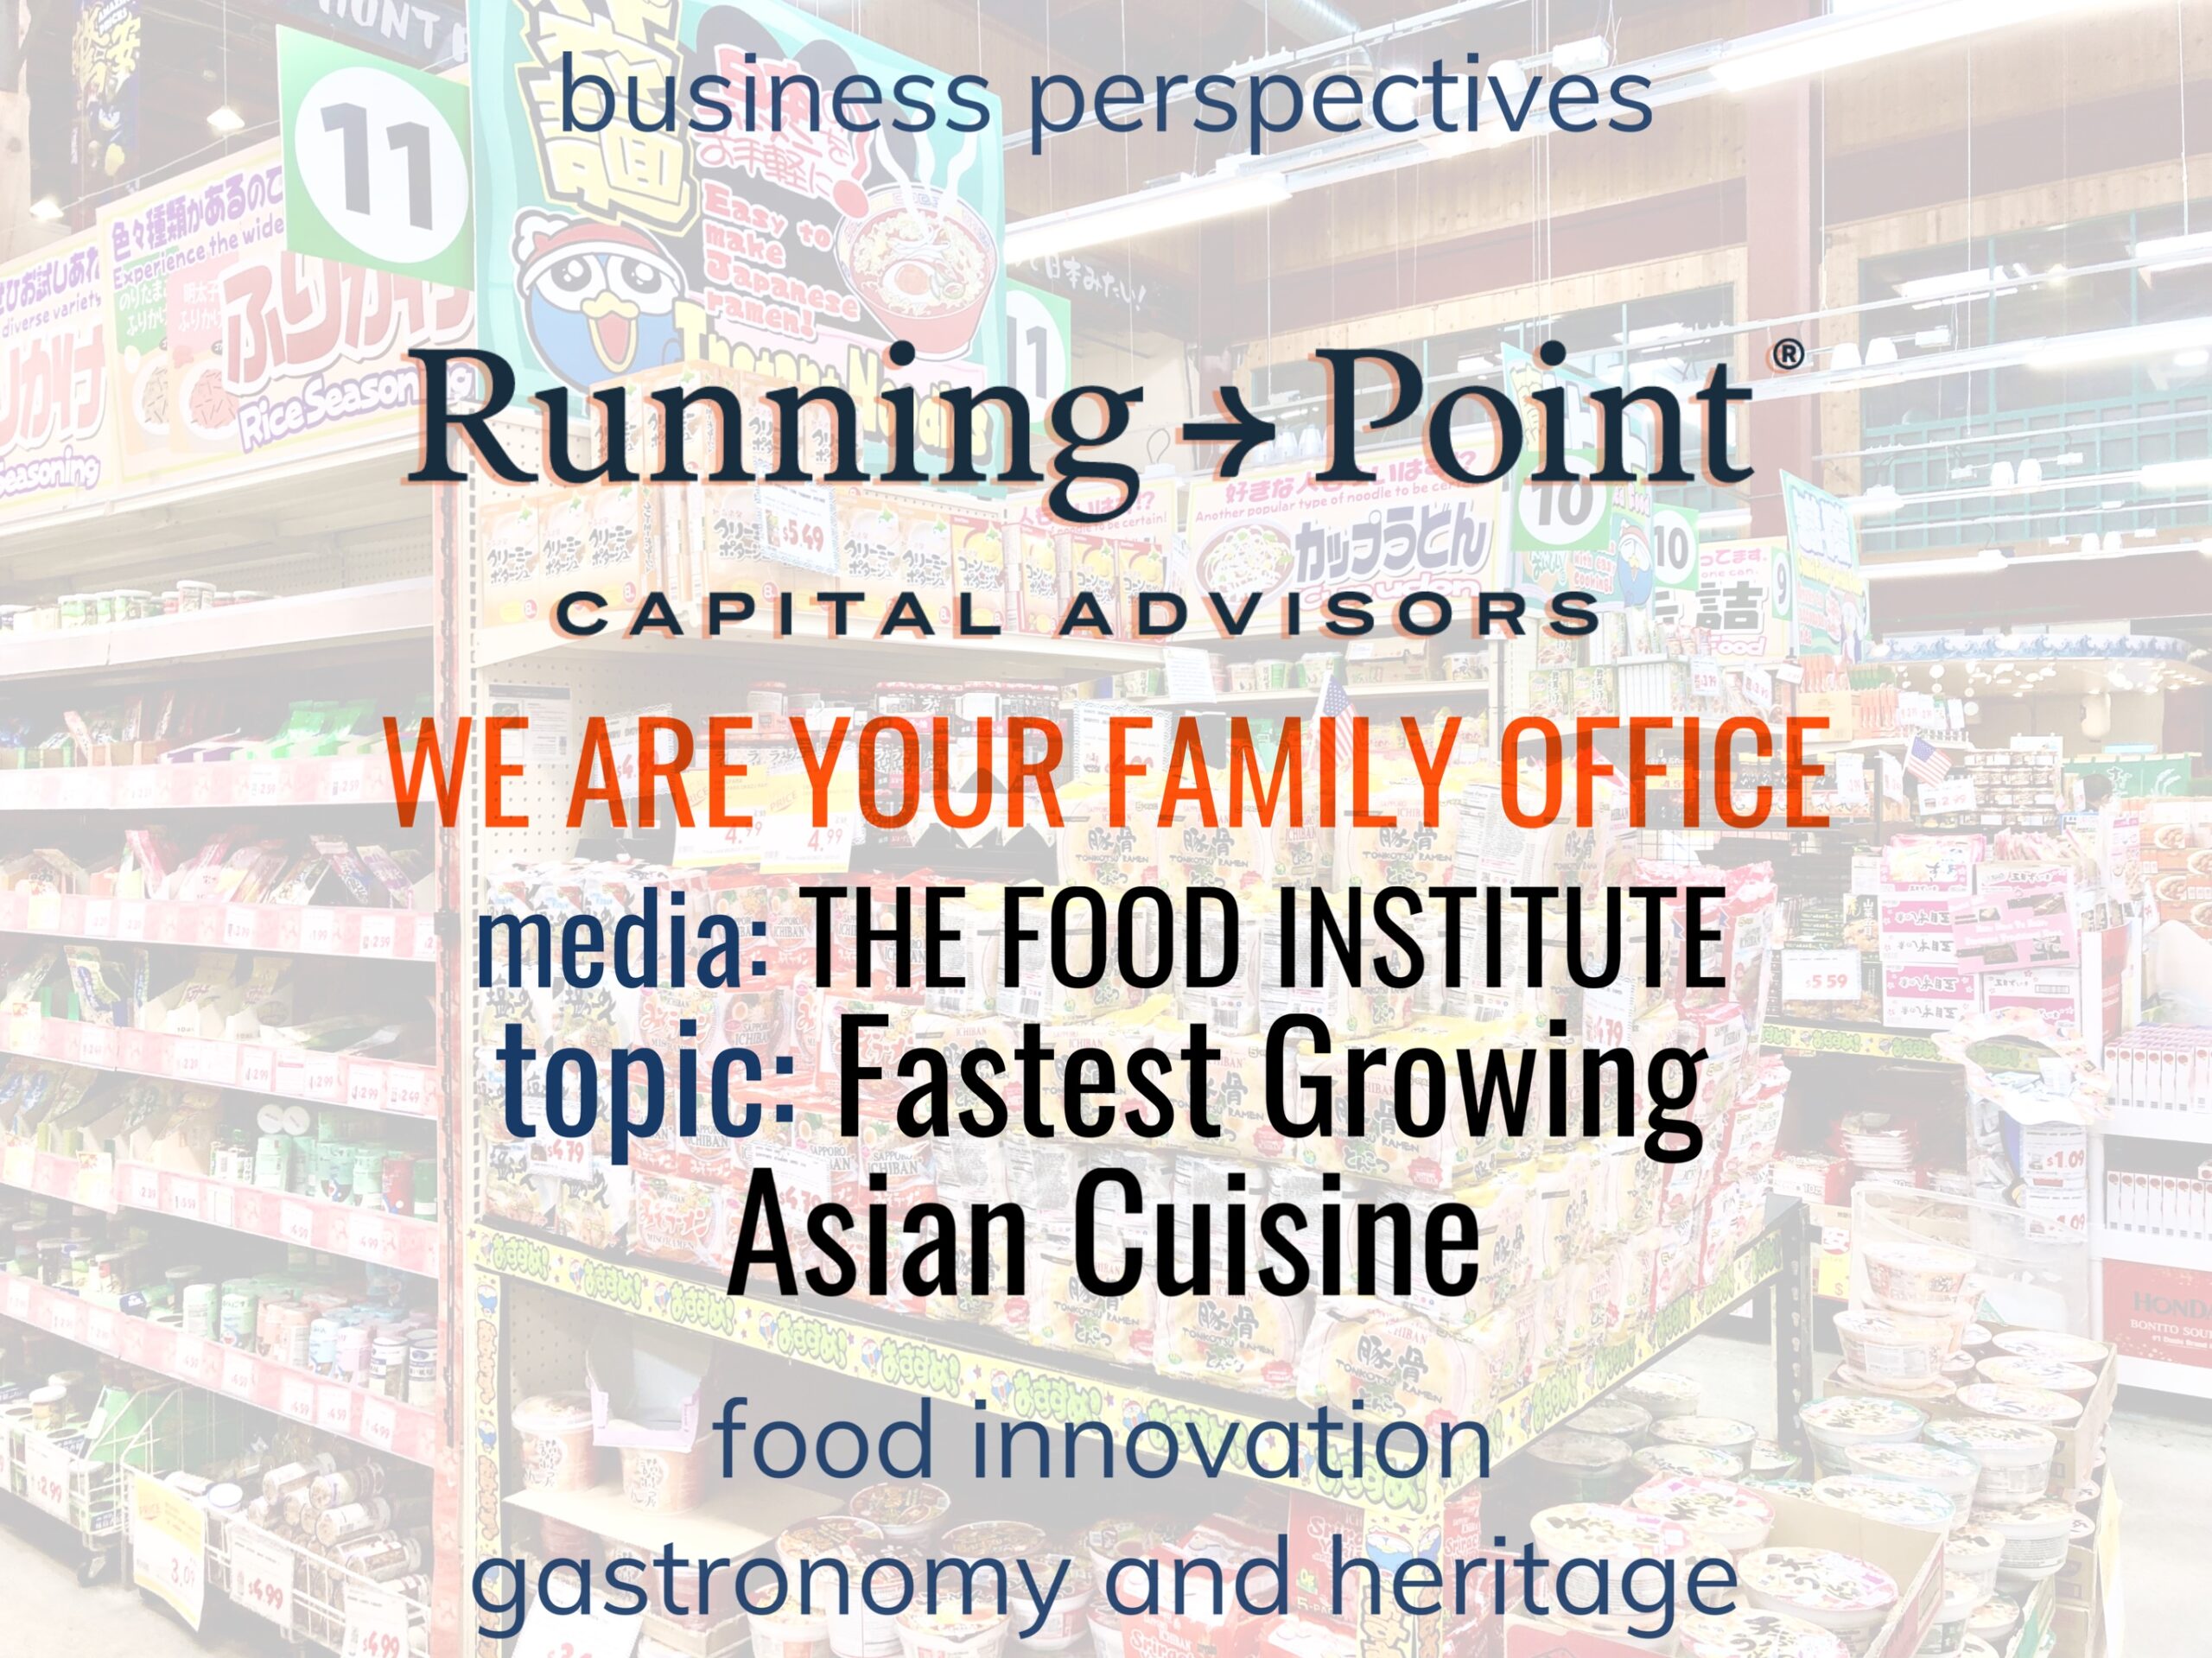 The Food Institute: What is the Fastest Growing Asian Cuisine?